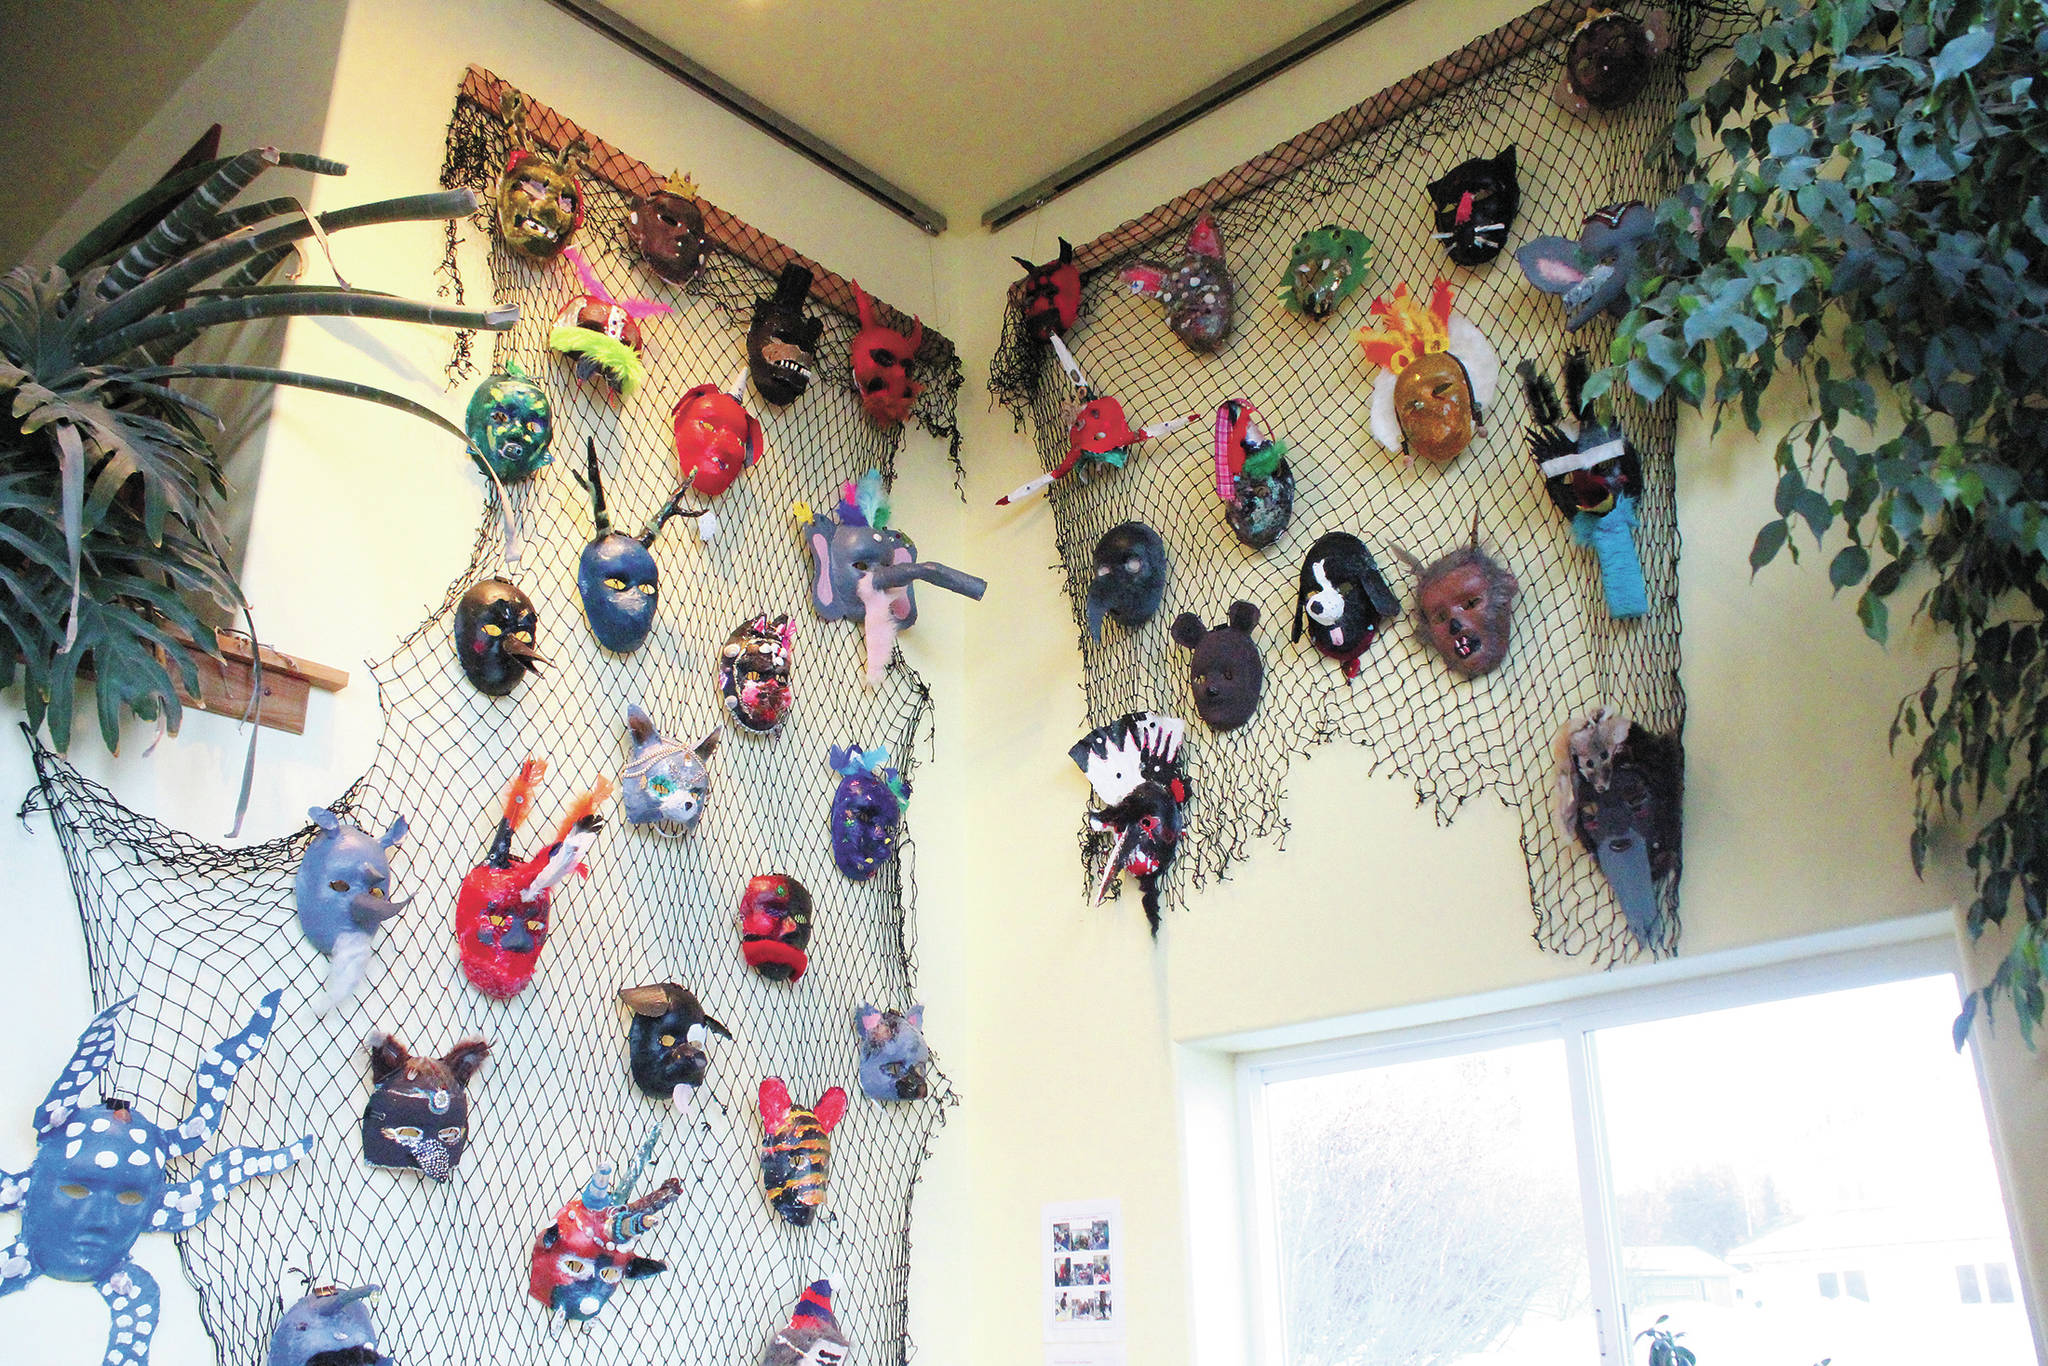 Decorative masks made by Fireweed Academy students hang in K-Bay Caffe during an art exhibit opening on Thursday, March 5, 2020 in Homer, Alaska. The masks were made with the help of Artist in the Schools Program participant Gail Baker. (Photo by Megan Pacer/Homer News)